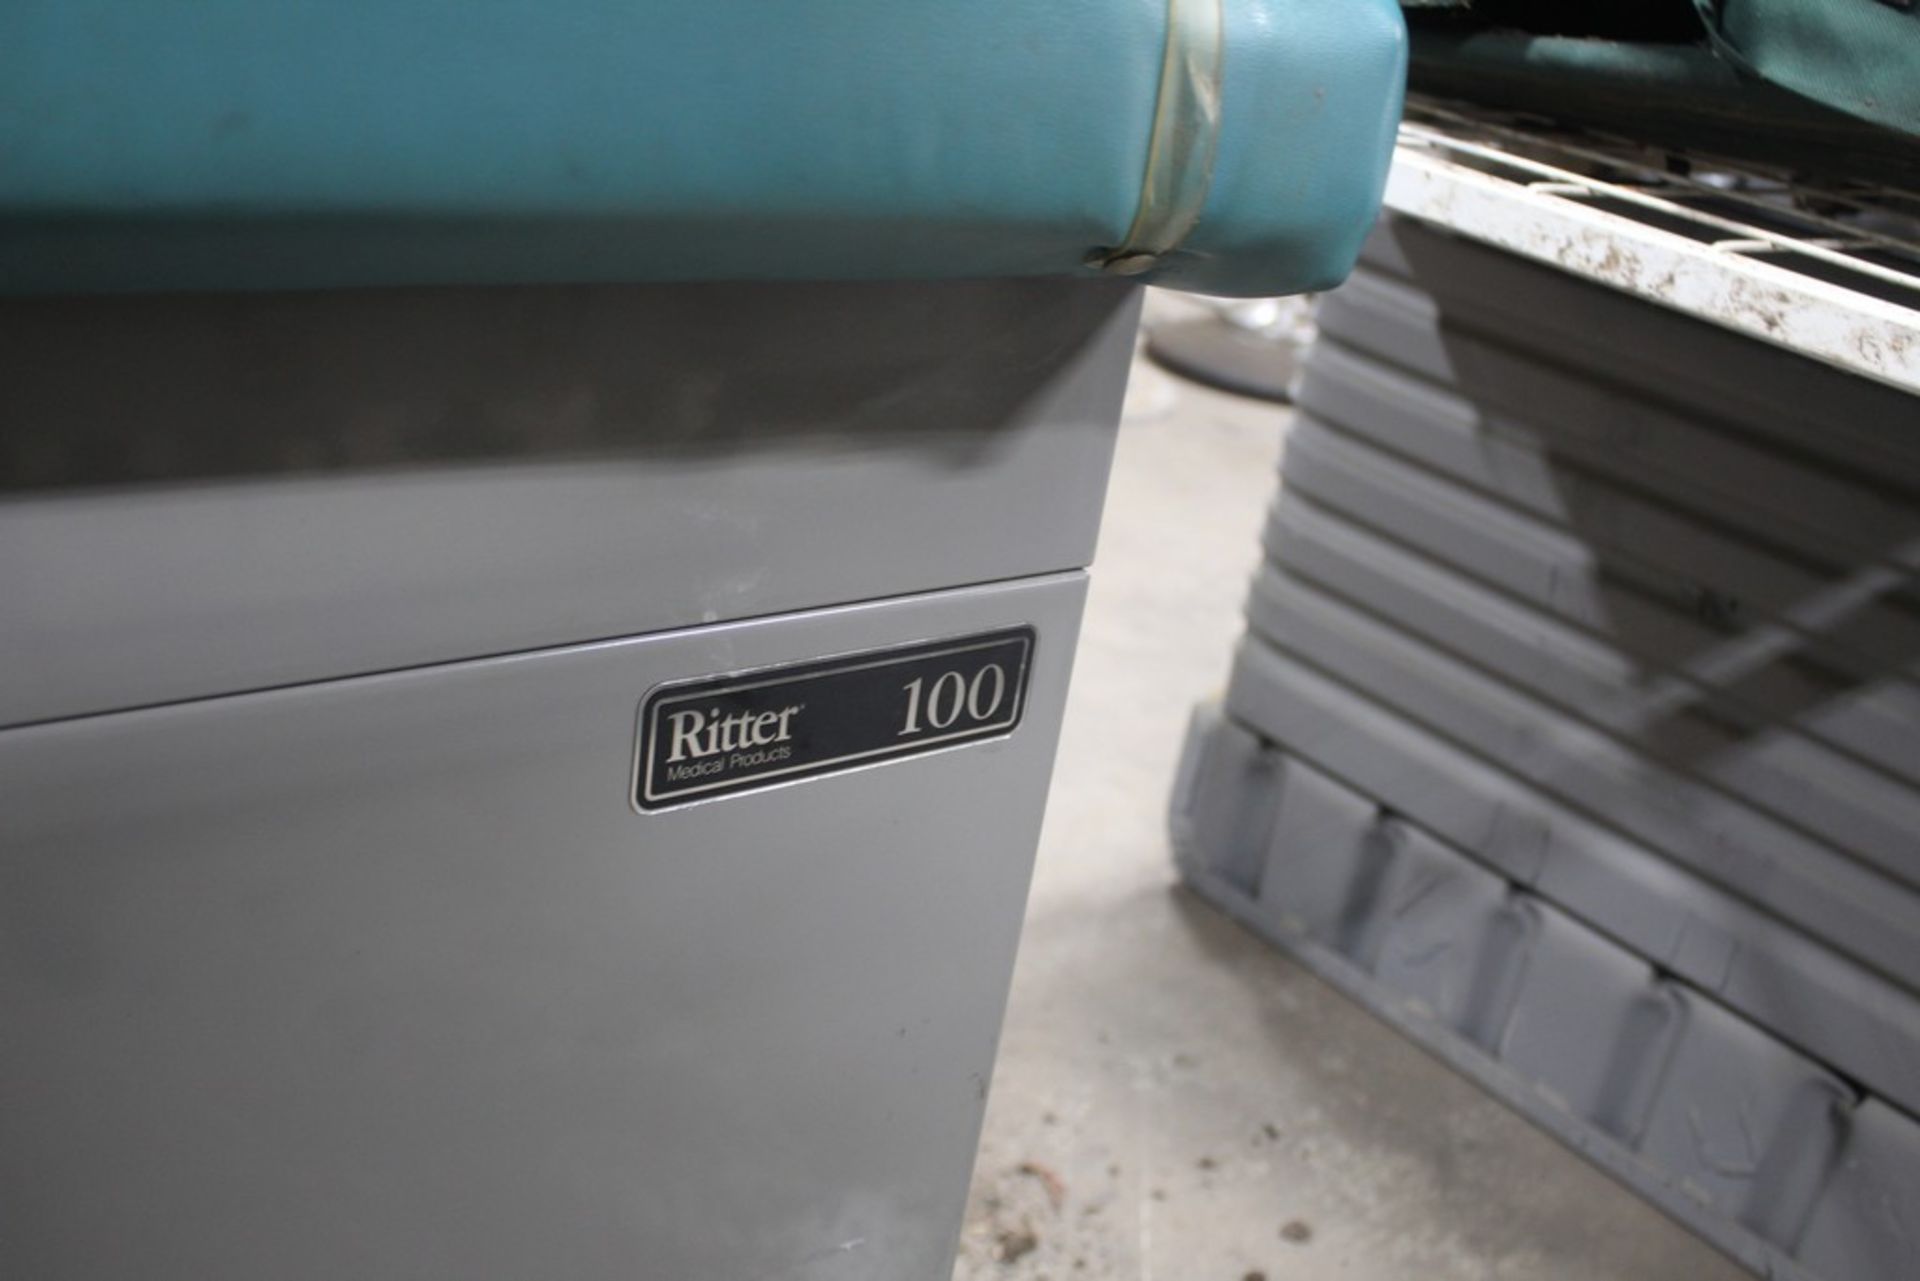 RITTER 100 ELEVATED EXAM TABLE - Image 4 of 4